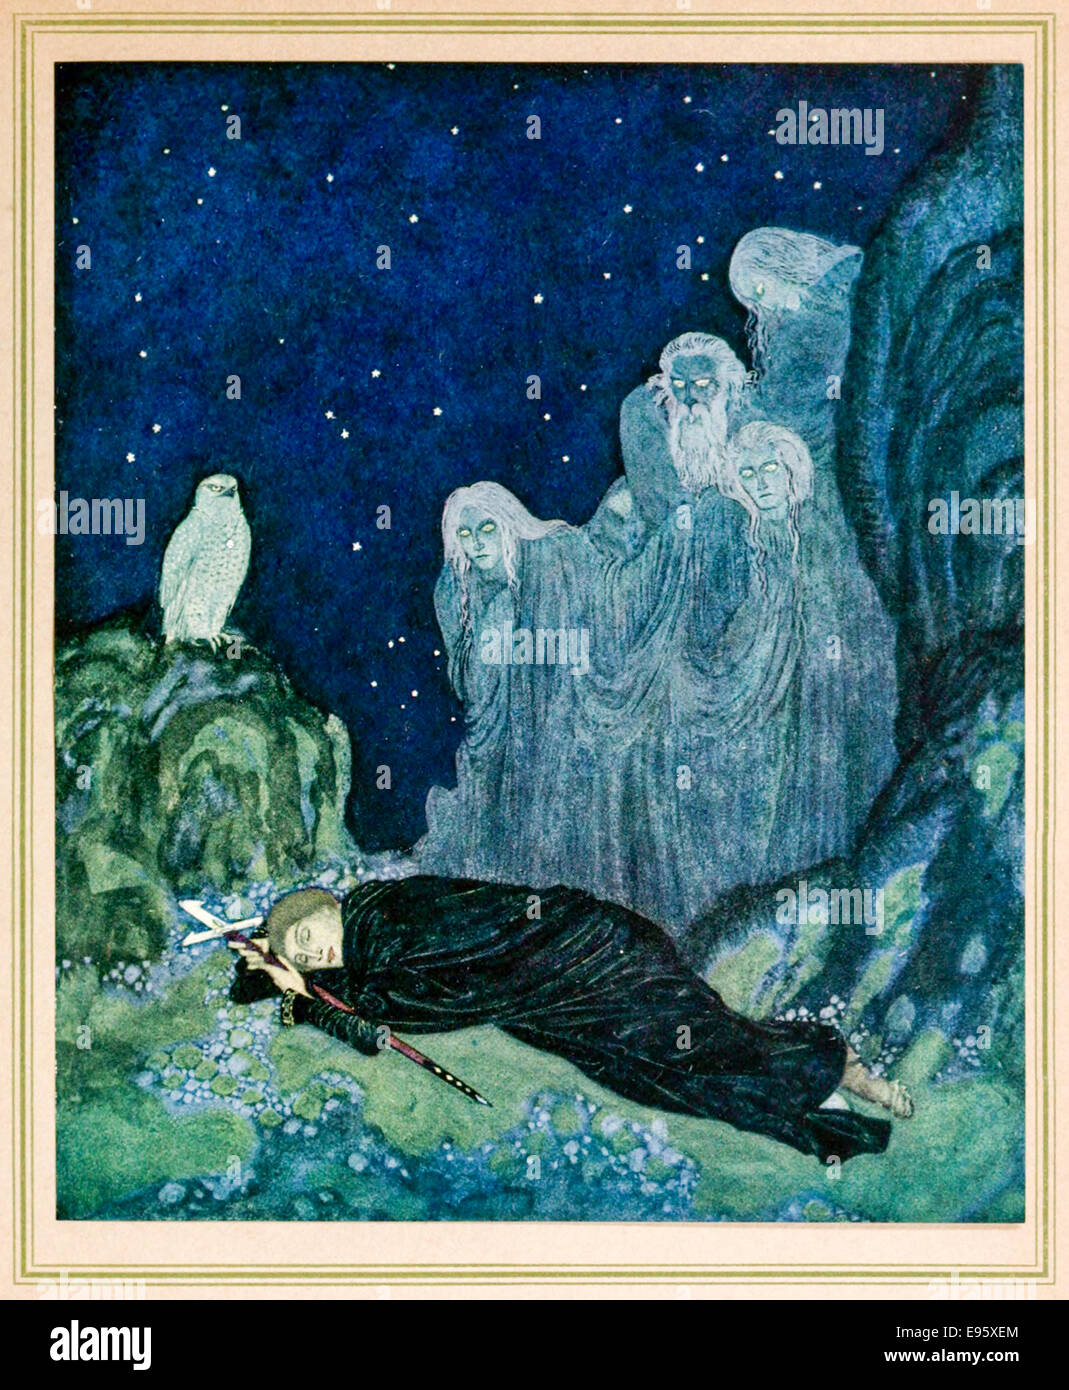 Eric and the Hawk - Edmund Dulac illustration from ‘The Dreamer of Dreams’. See description for more information Stock Photo